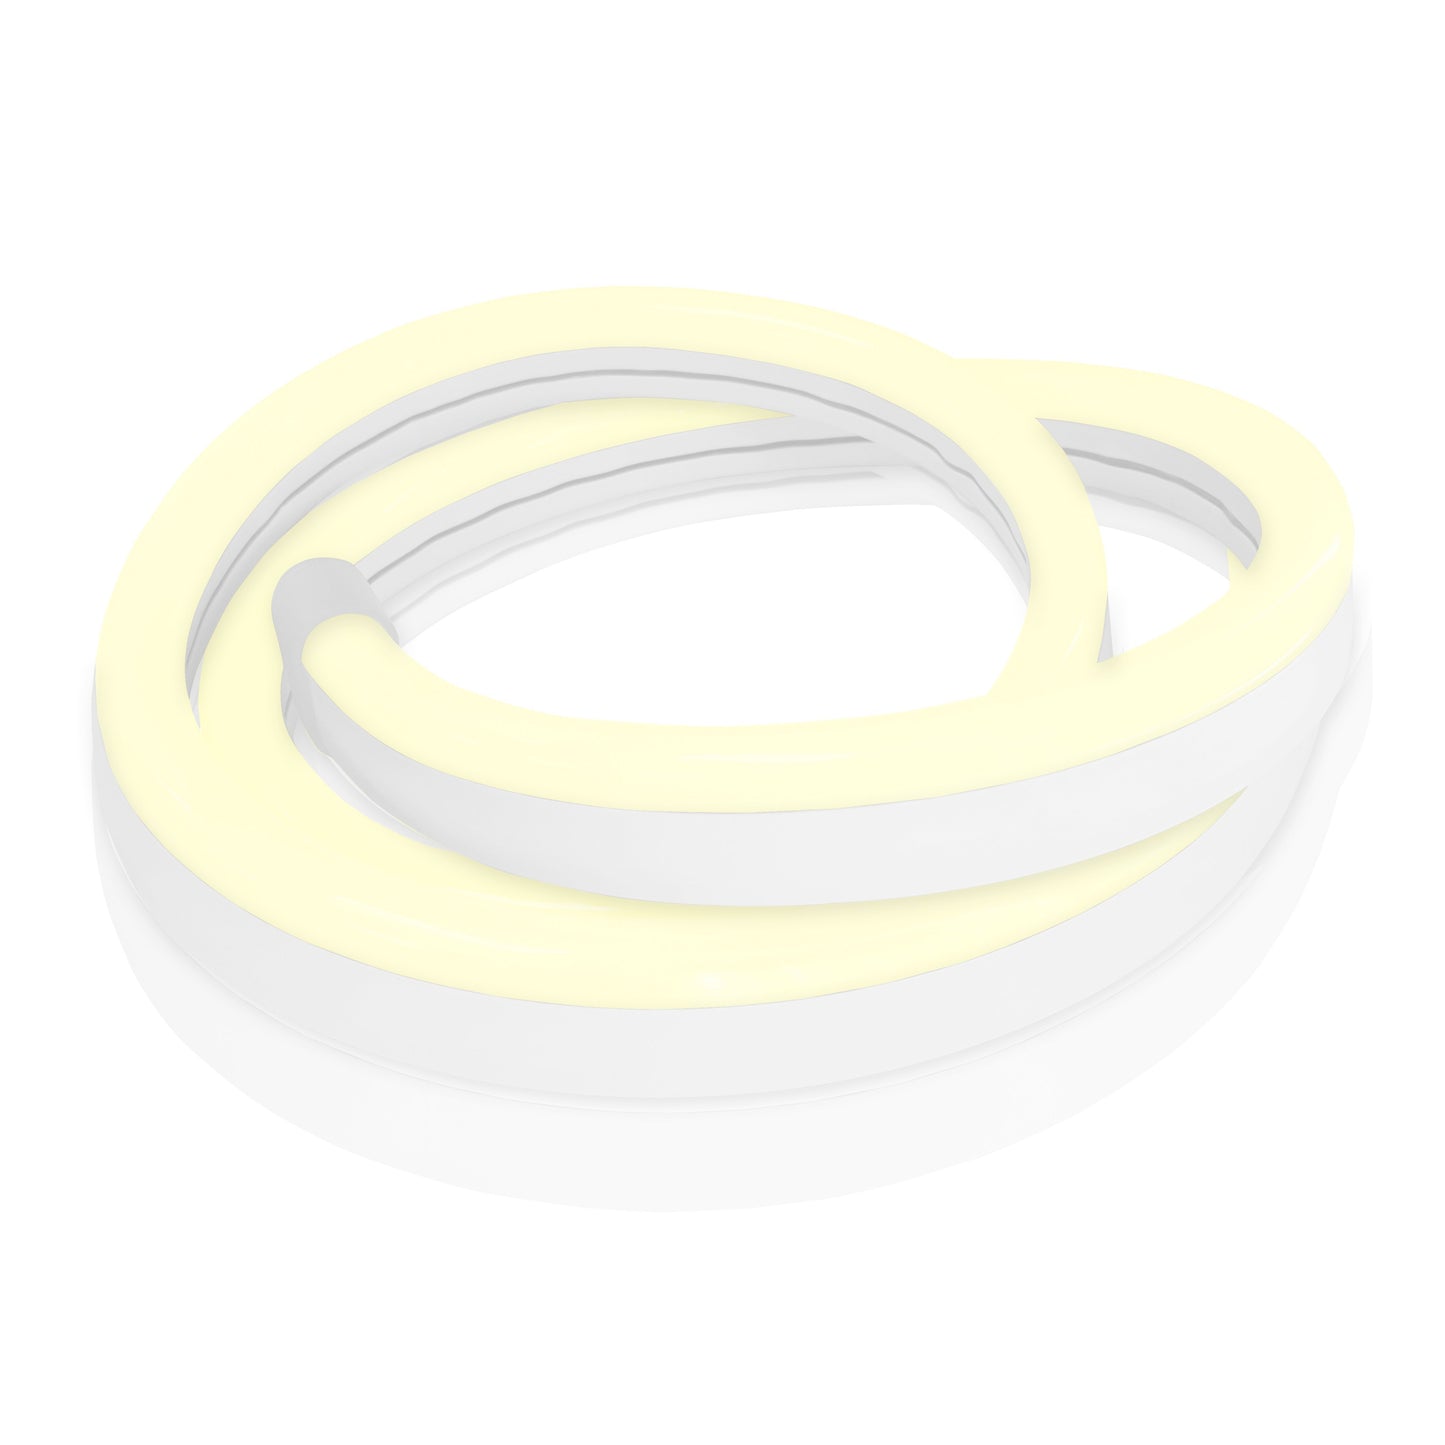 loosely coiled 4000k natural white neon led strip light